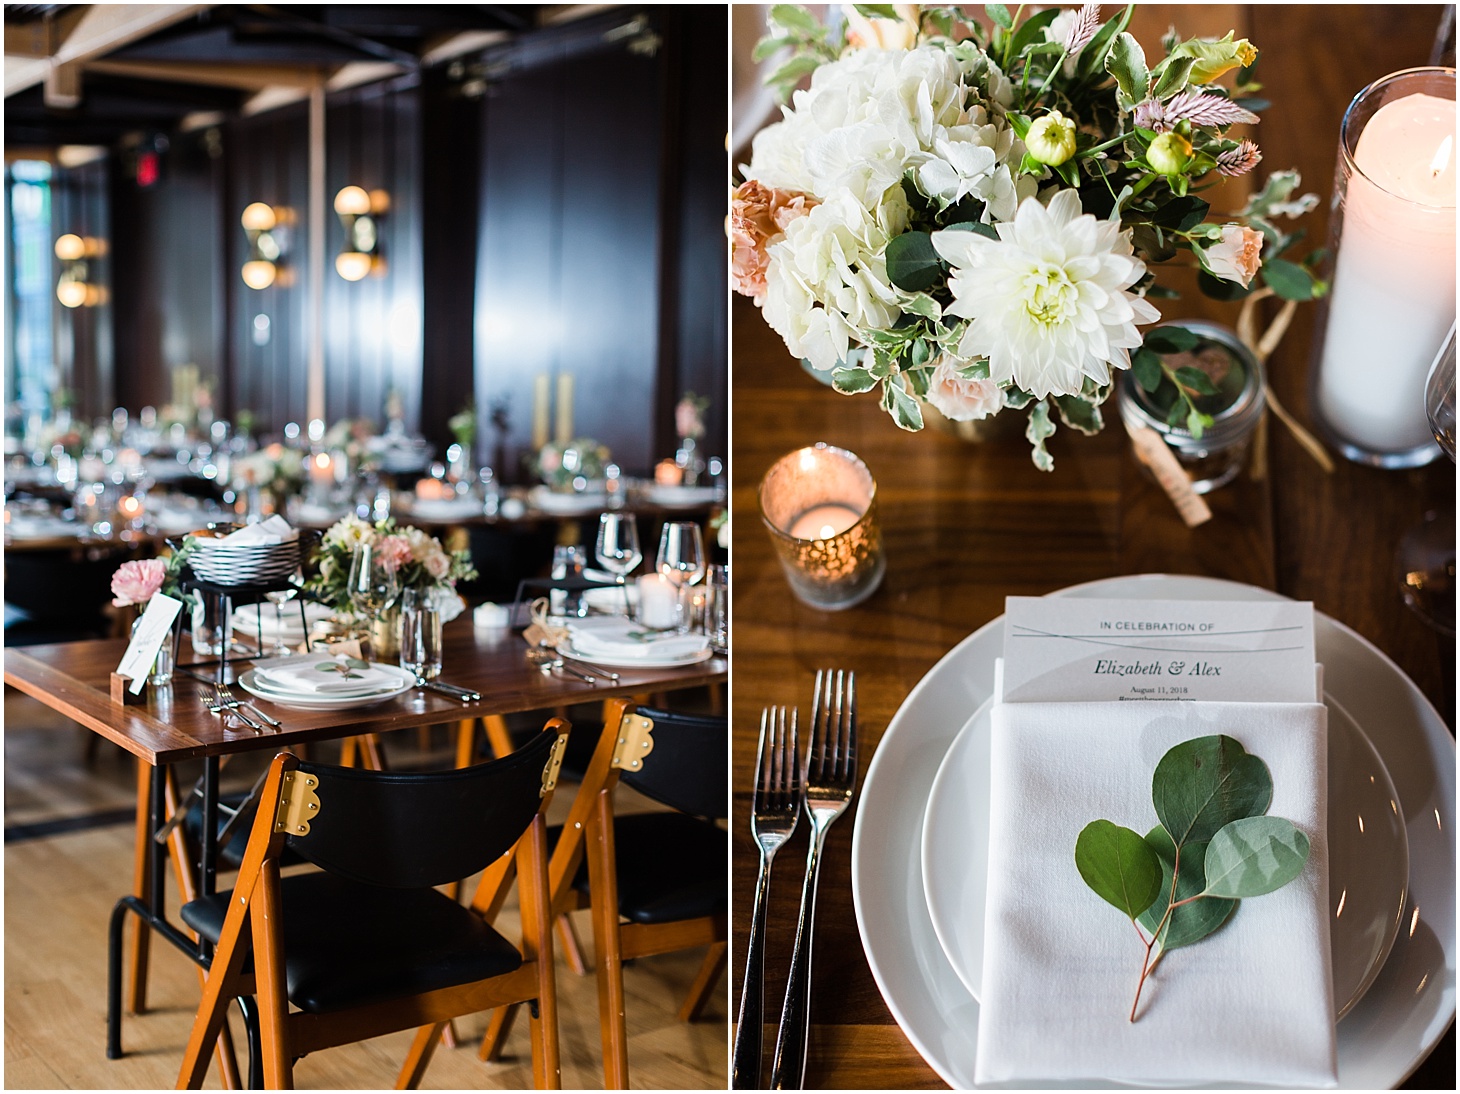 Wedding Reception at District Winery | Love Blooms Flowers | Chic and Modern Interfaith Wedding in Washington, DC | Sarah Bradshaw Photography